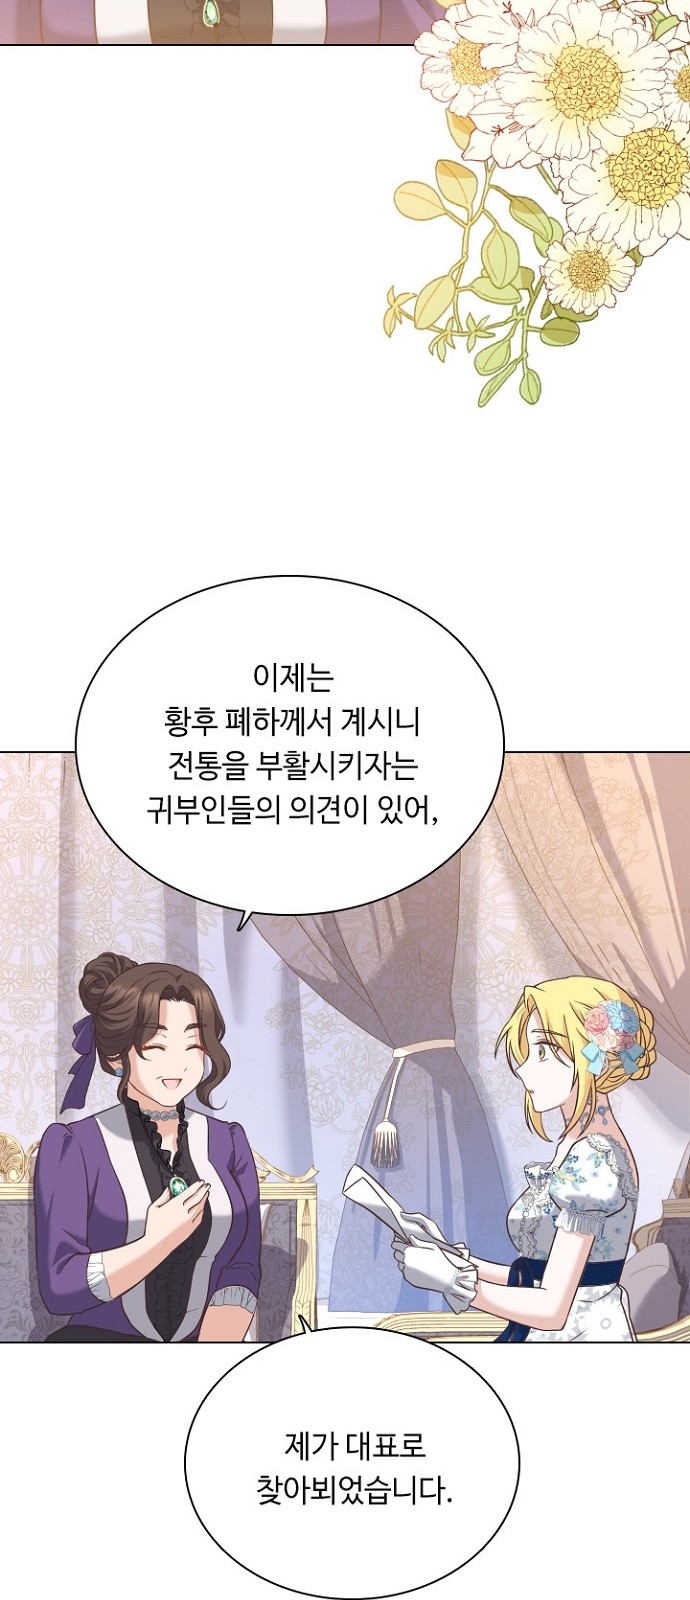 His Majesty's Proposal (A Night With the Emperor) - Chapter 42 - Page 3